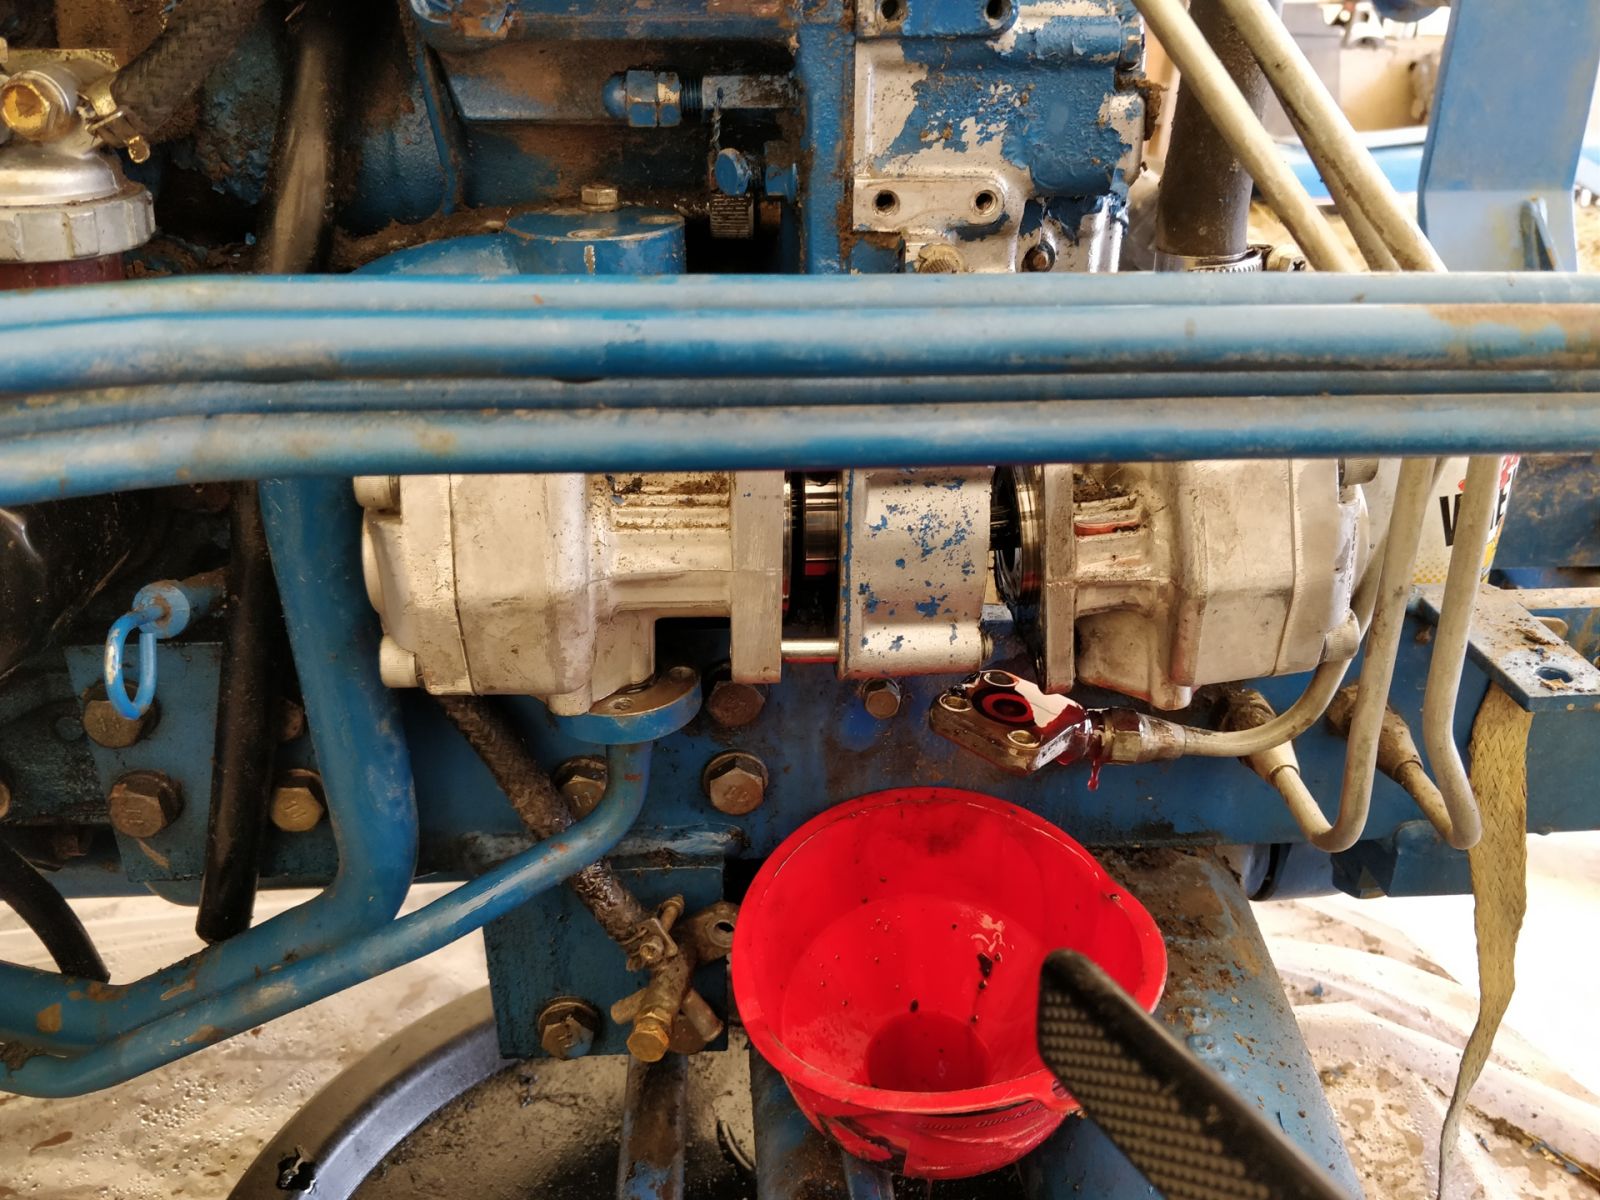 Separating the hydraulic pumps...